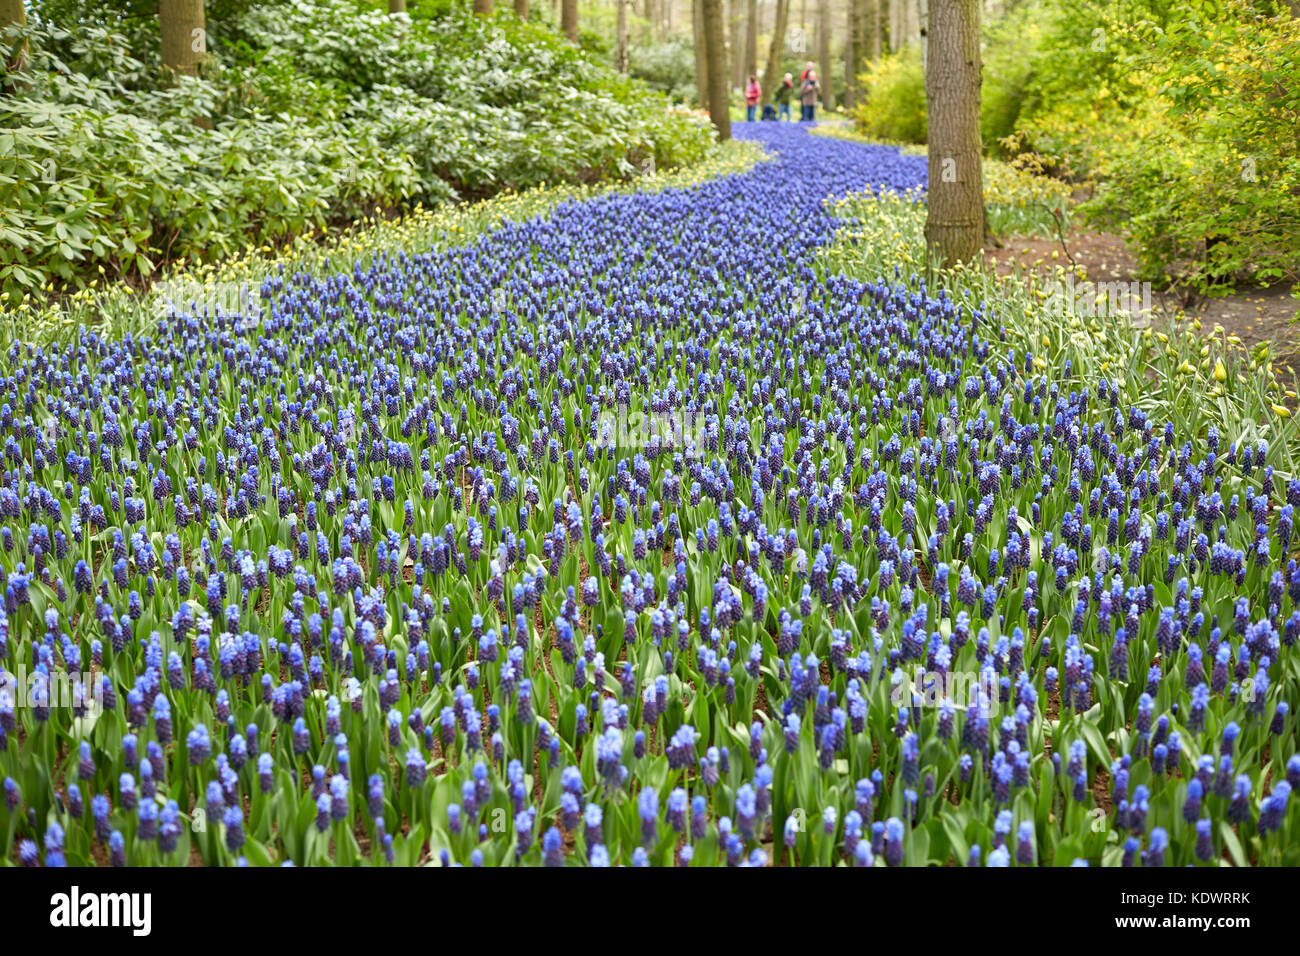 Keukenhof gardens in Holland, famed for its Spring displays of tulips, hyacinths and daffodils Stock Photo